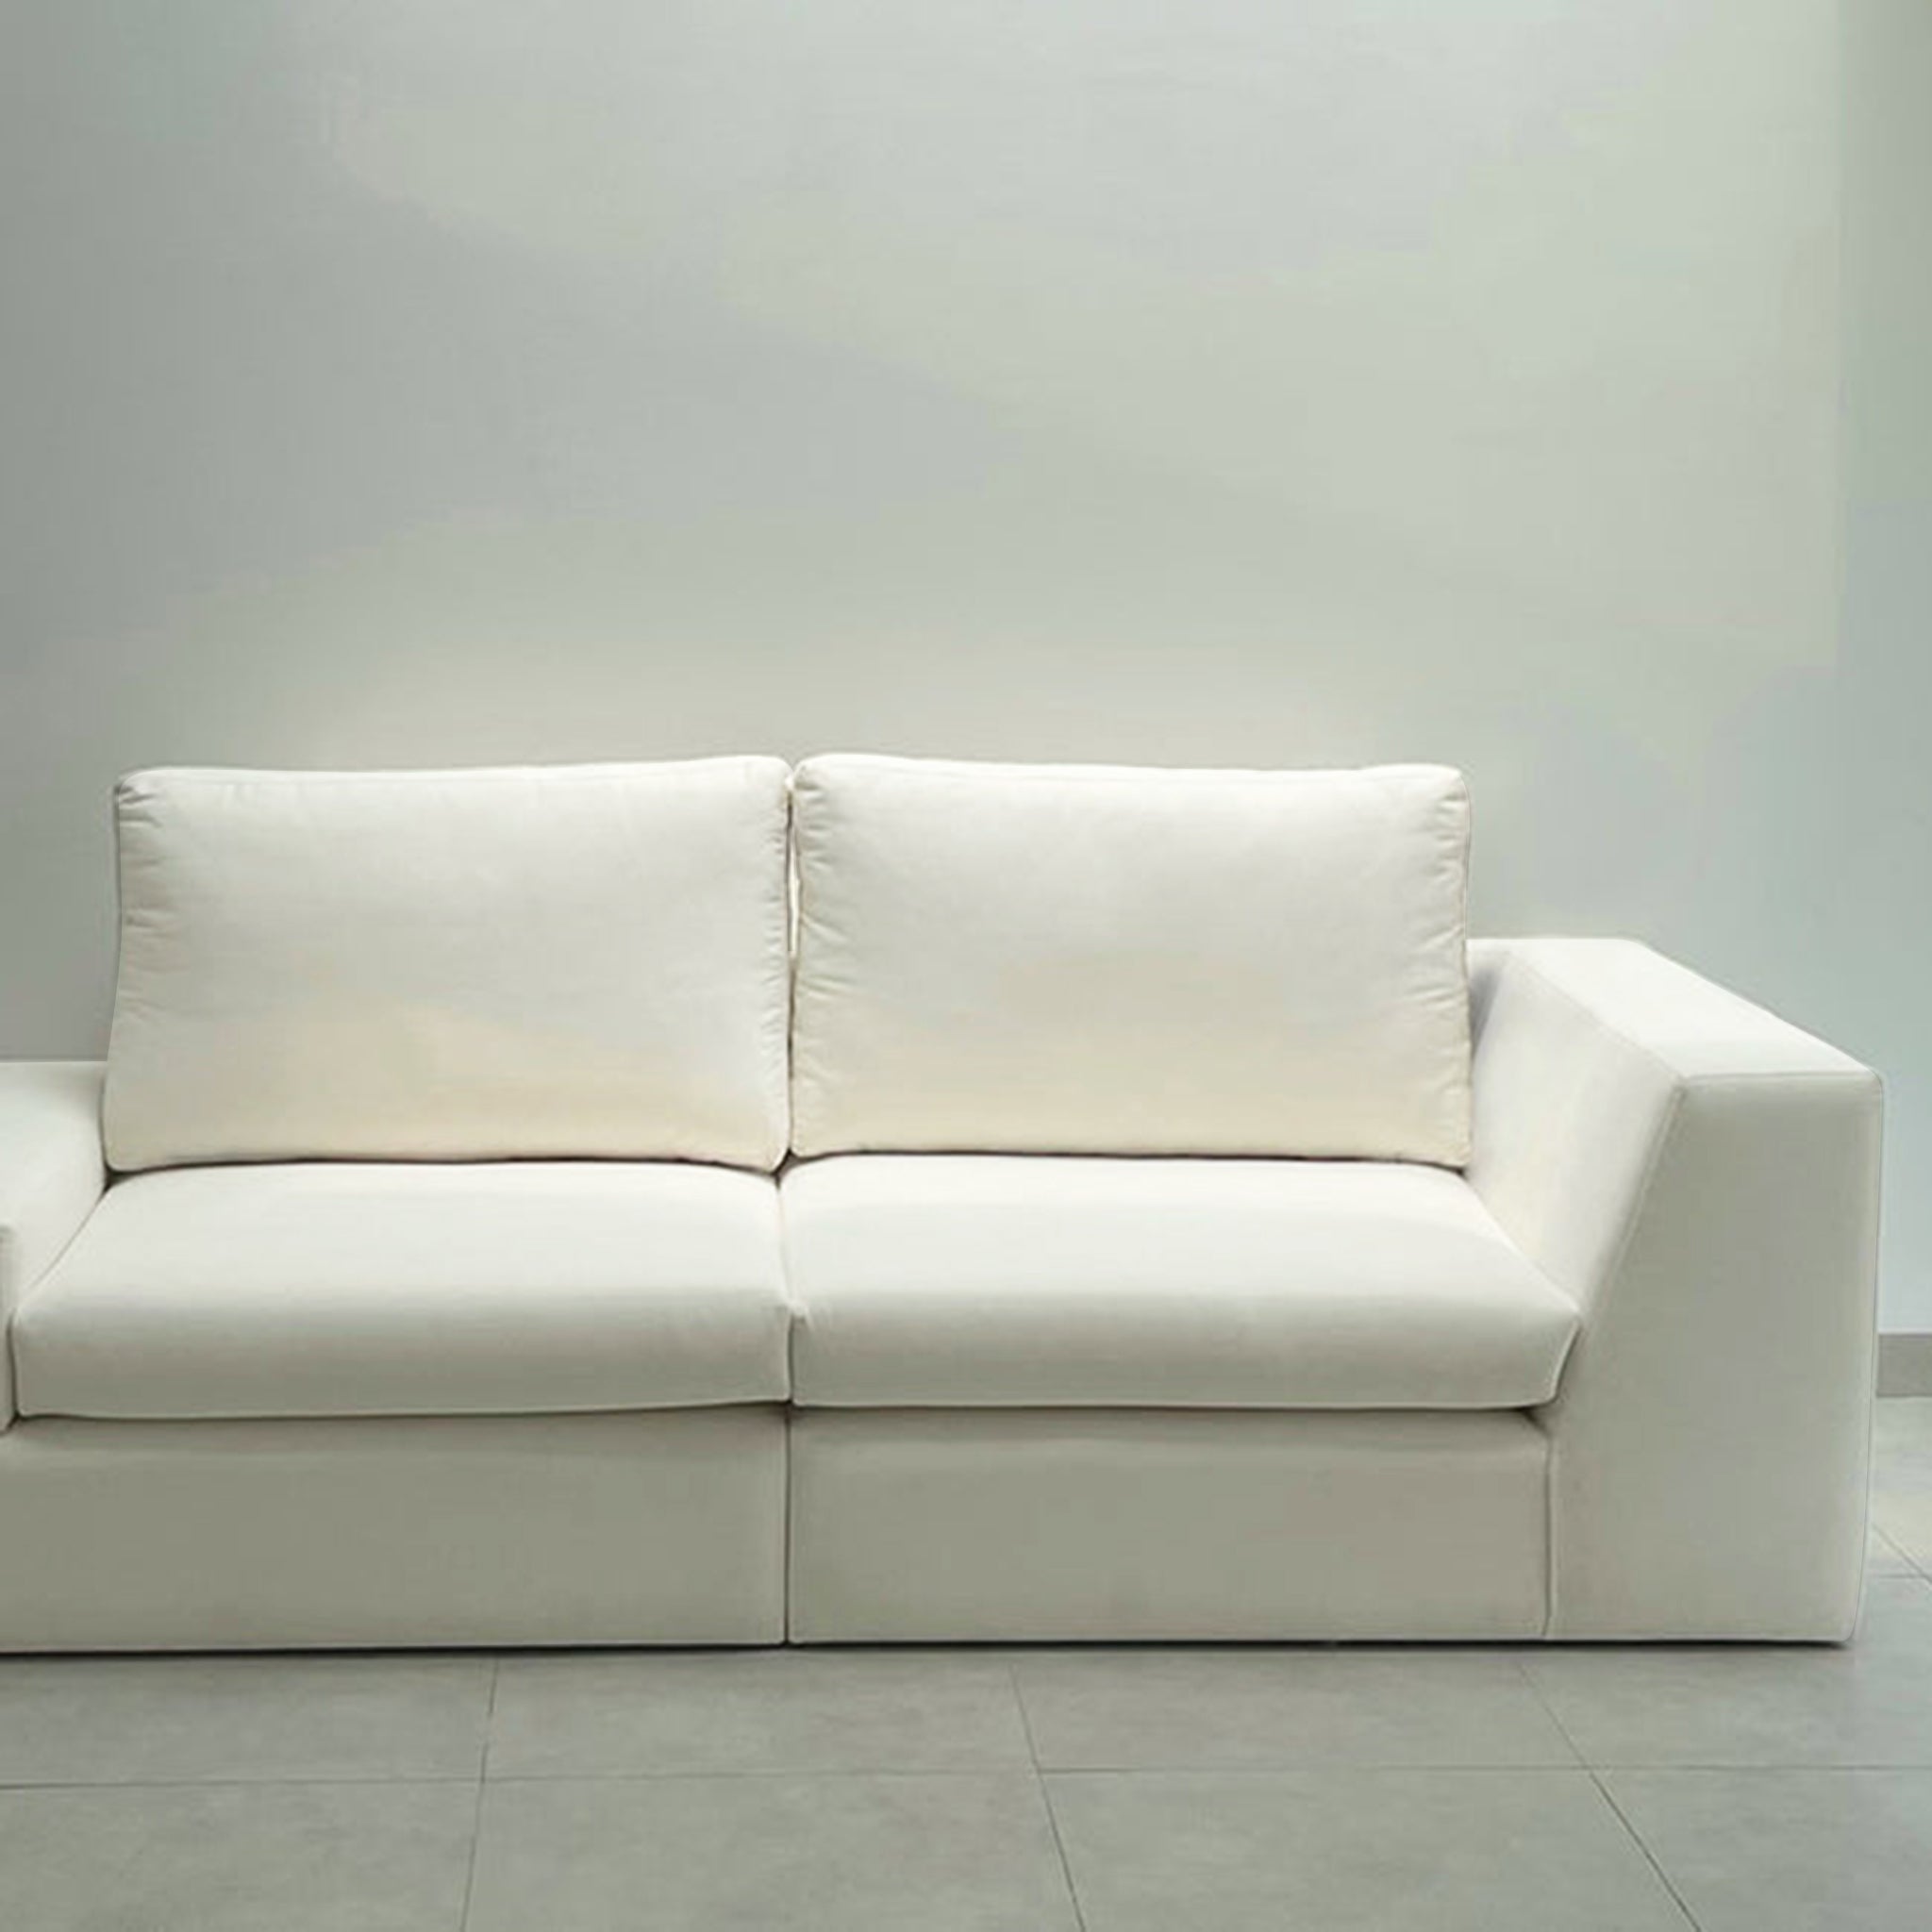 Side view of a modern white sofa showcasing clean lines and plush cushions, ideal for a sleek and minimalist living room decor.